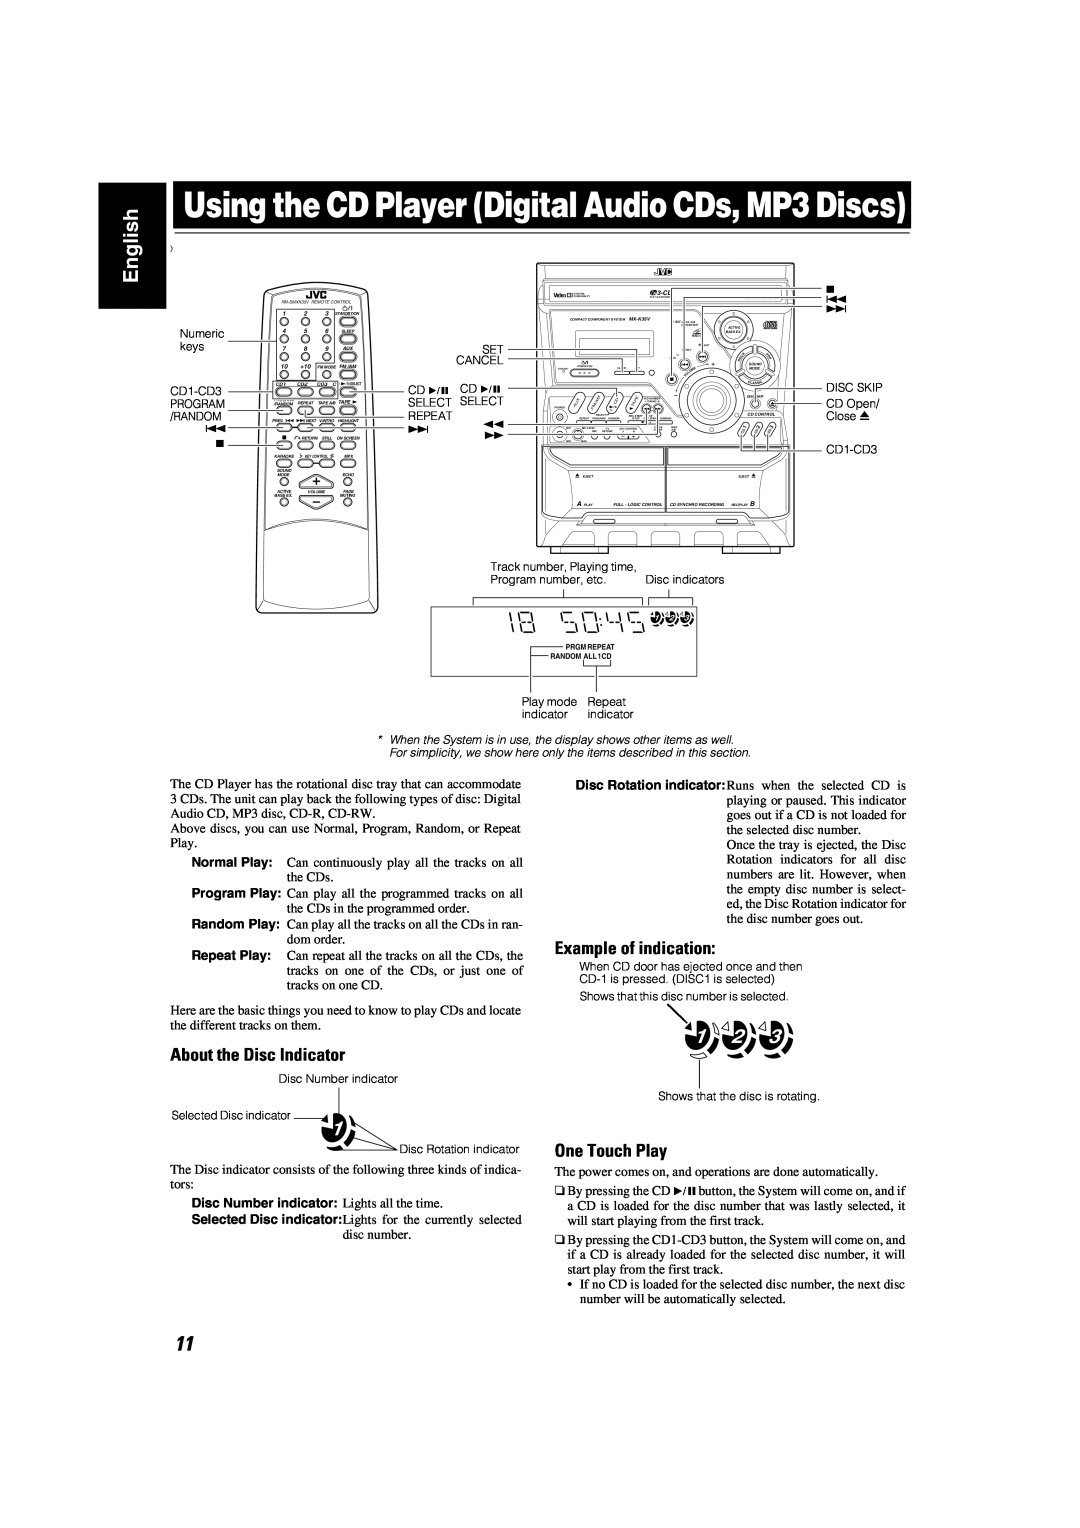 JVC MX-K35V manual About the Disc Indicator, Example of indication, One Touch Play, English 